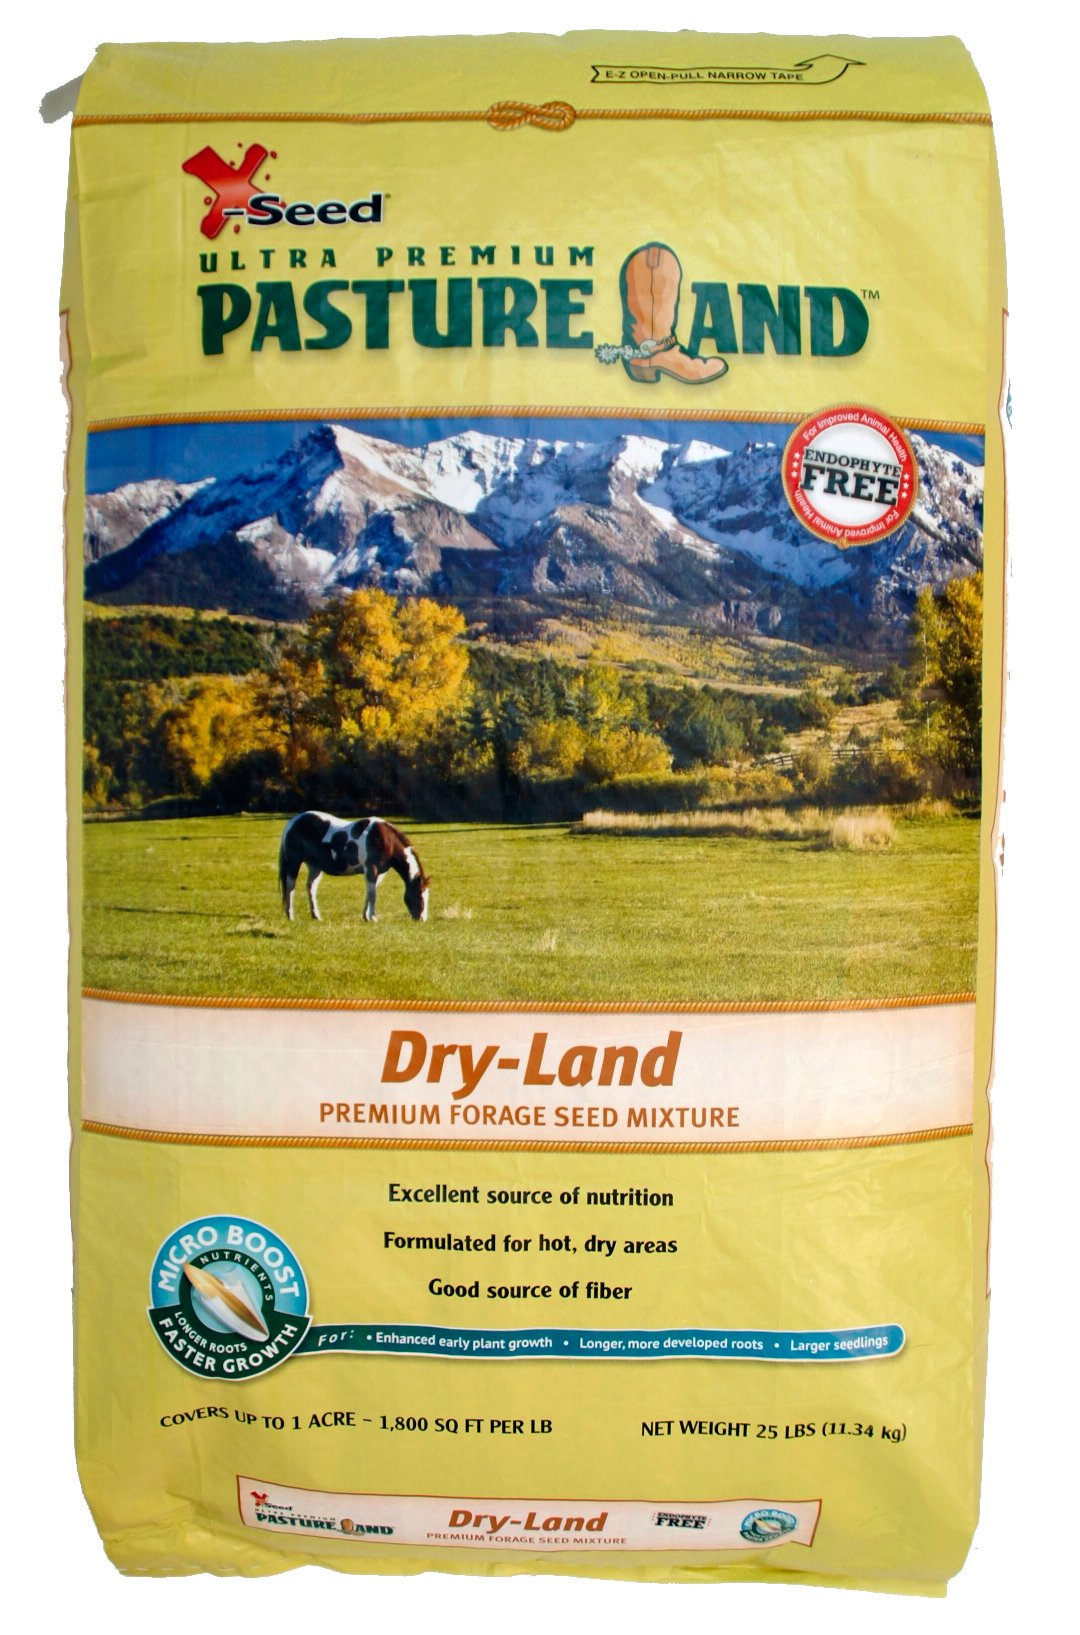 X-Seed 440FS0010UCT185 Dry-Land Mixture Pasture Forage Seed, 25-Pound,Yellow